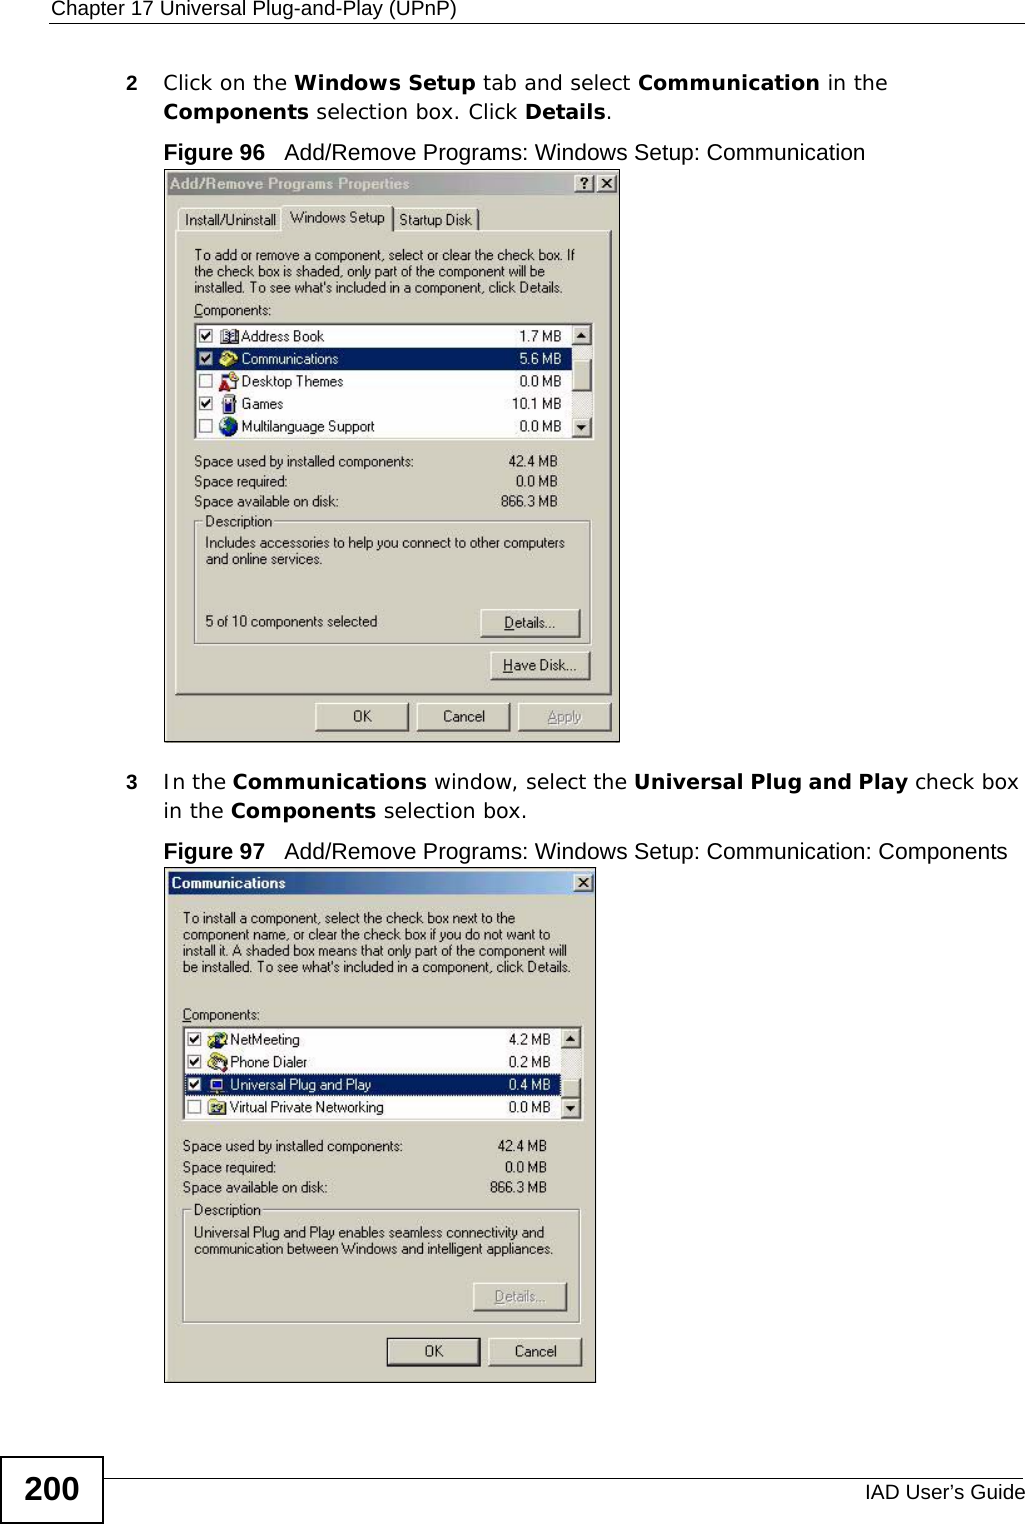 Chapter 17 Universal Plug-and-Play (UPnP)IAD User’s Guide2002Click on the Windows Setup tab and select Communication in the Components selection box. Click Details.  Figure 96   Add/Remove Programs: Windows Setup: Communication 3In the Communications window, select the Universal Plug and Play check box in the Components selection box. Figure 97   Add/Remove Programs: Windows Setup: Communication: Components